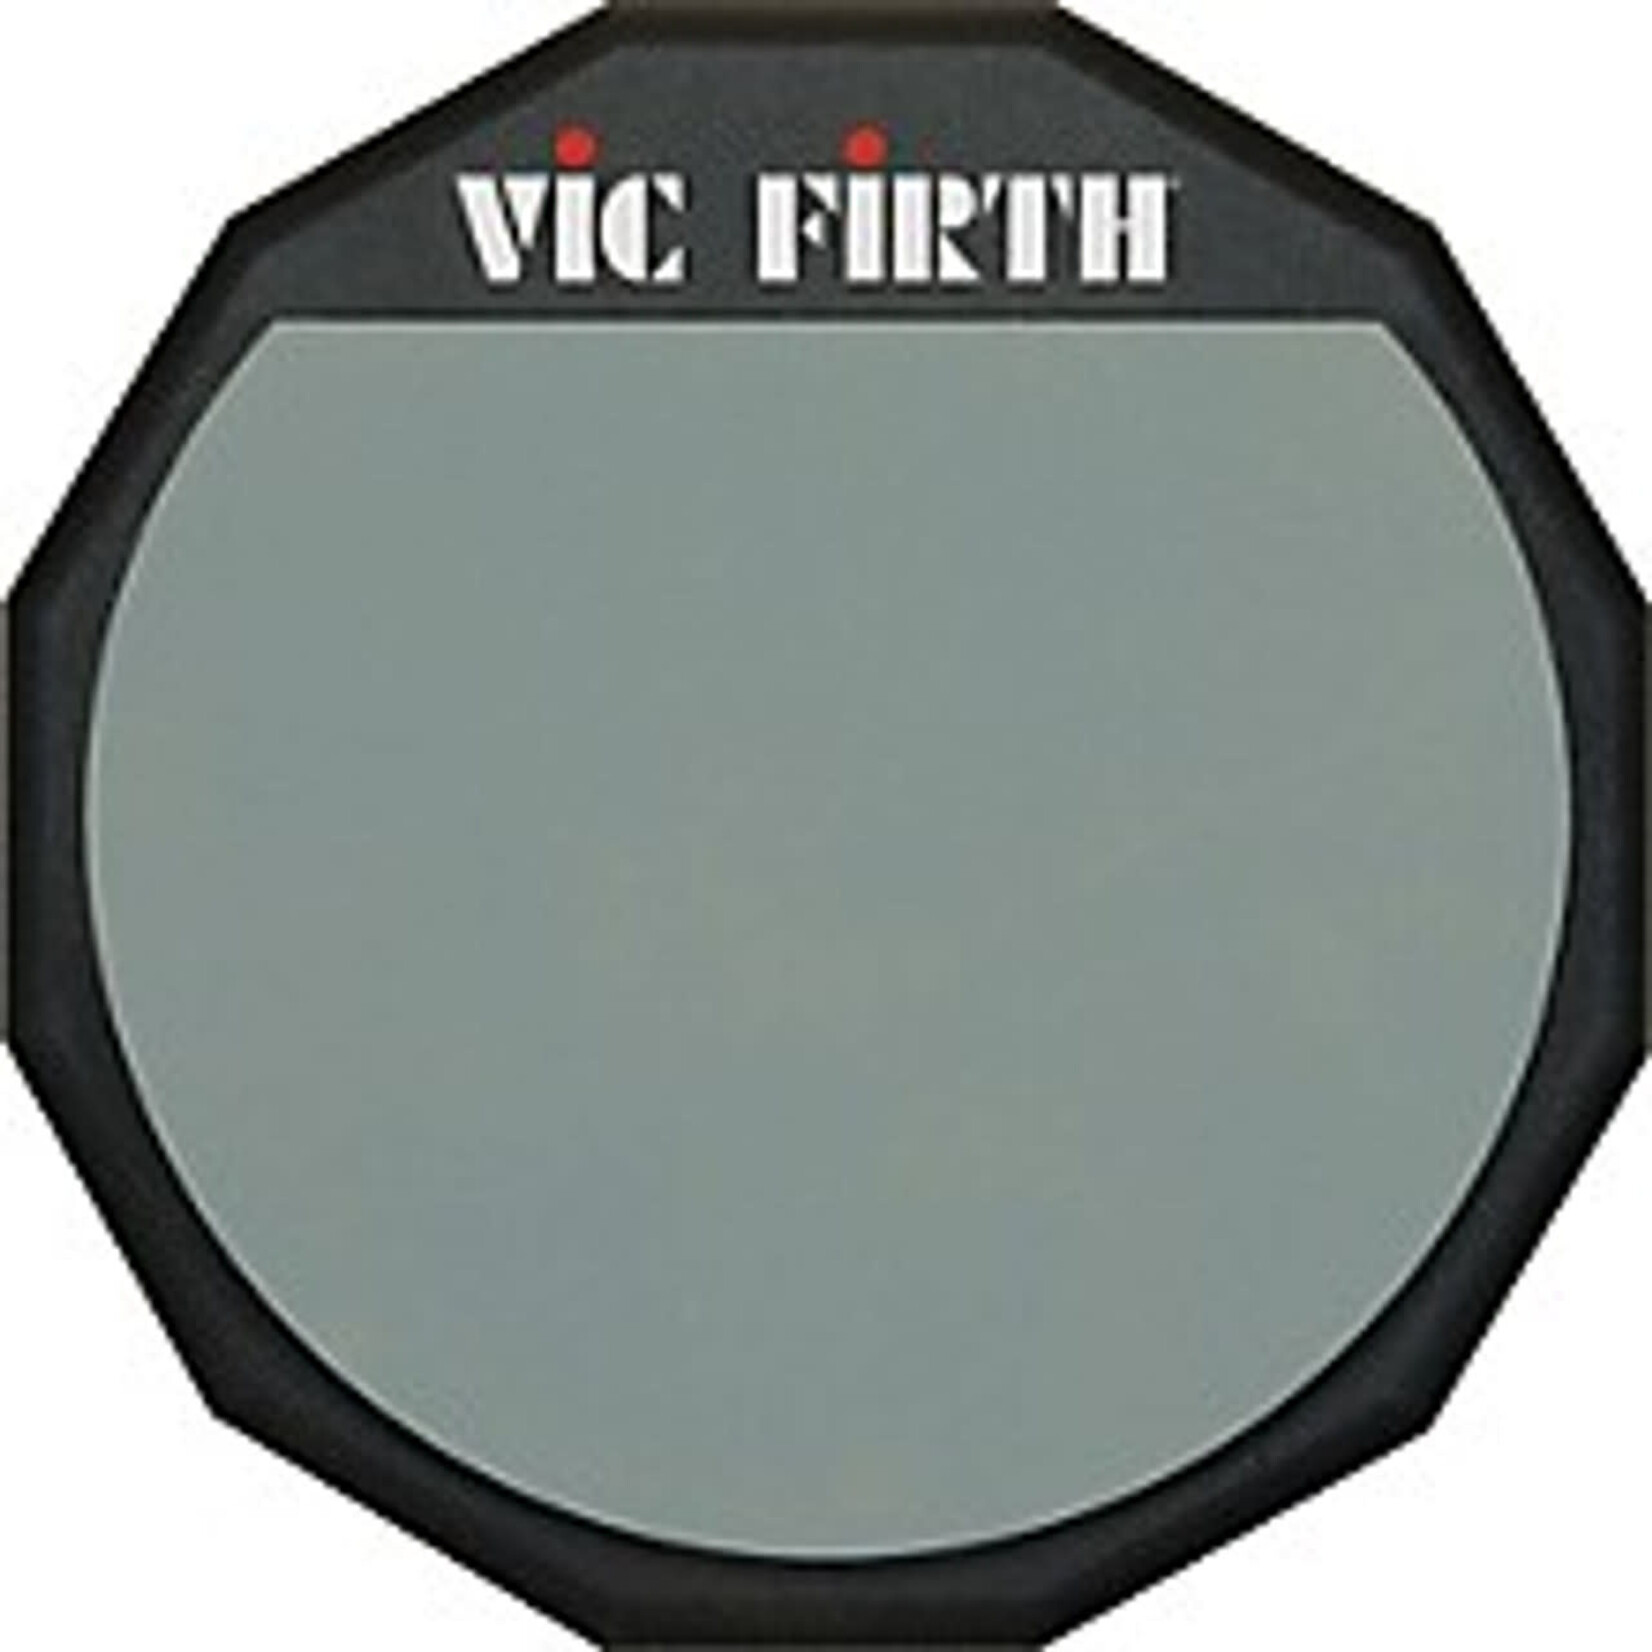 Vic Firth Vic Firth 6" Single Sided Practice Pad PAD6